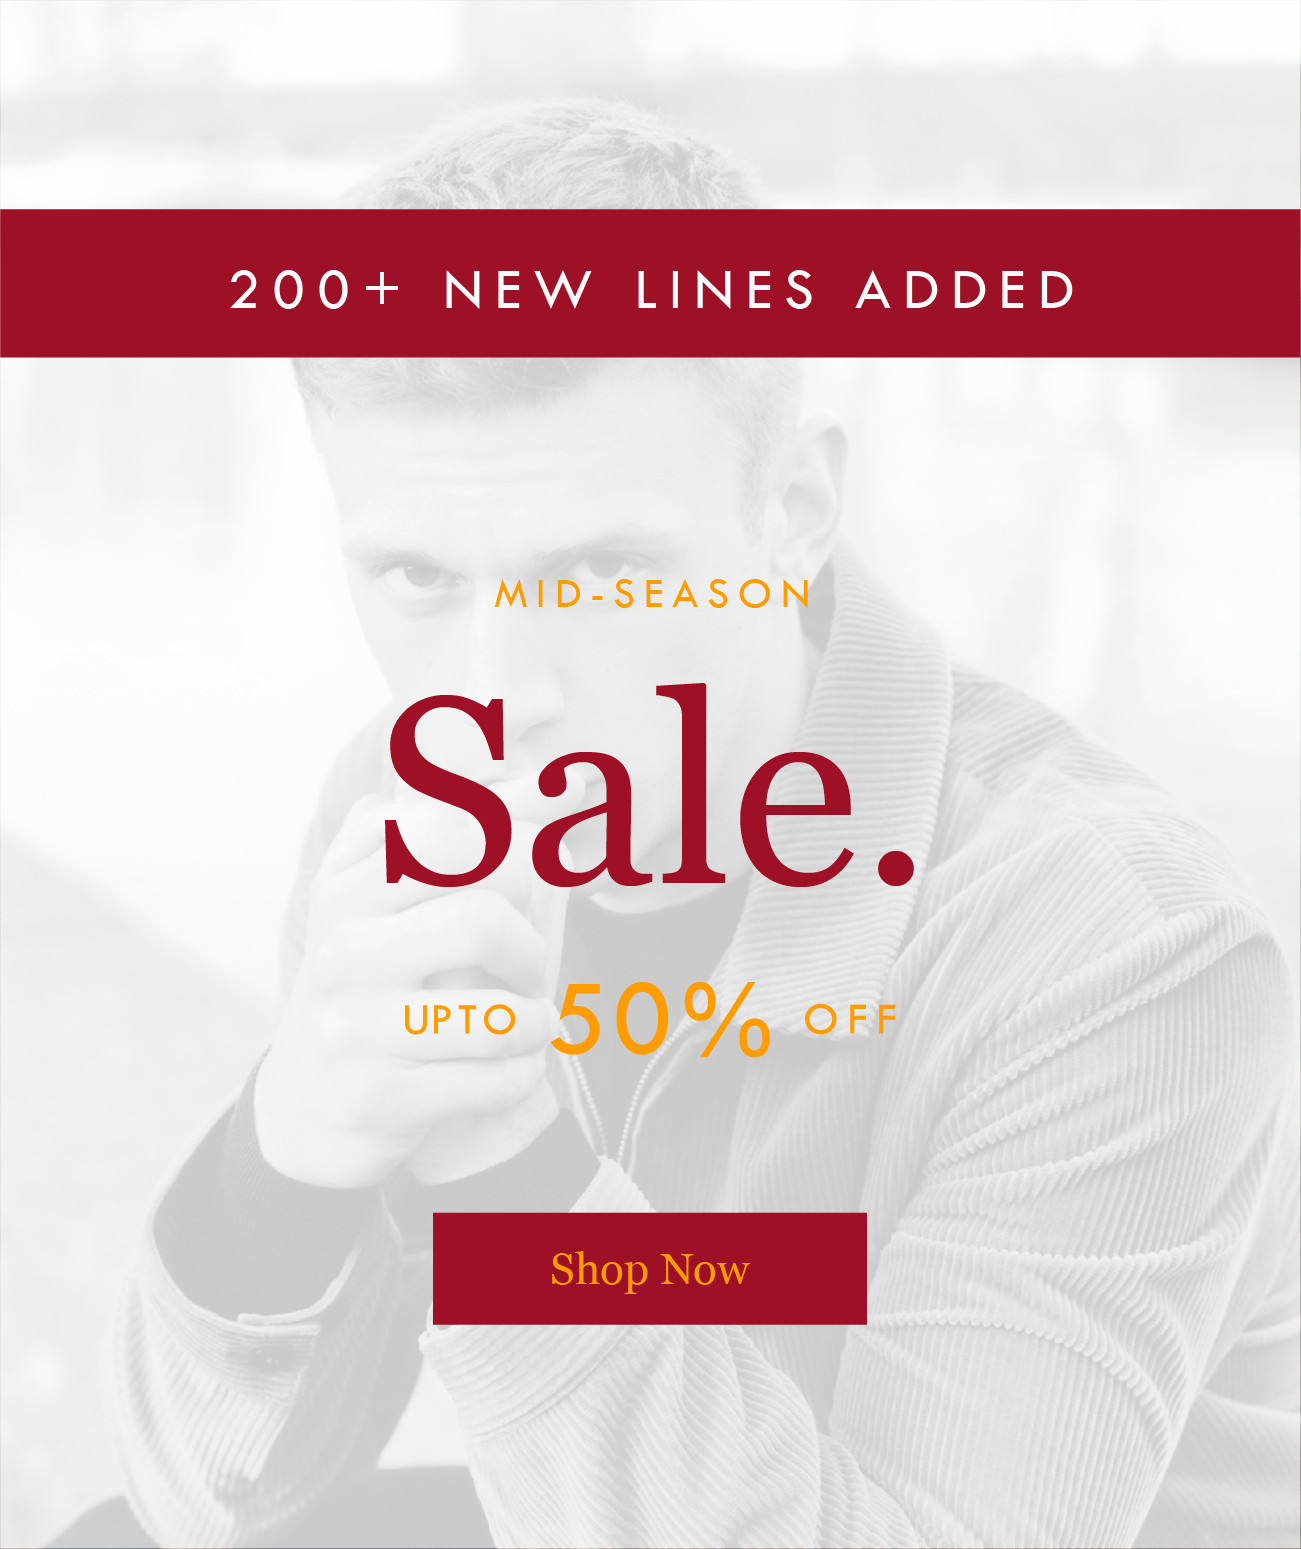 200+ NEW LINES ADDED
MID-SEASON 
Sale. 
UP TO 50% OFF
Shop Now